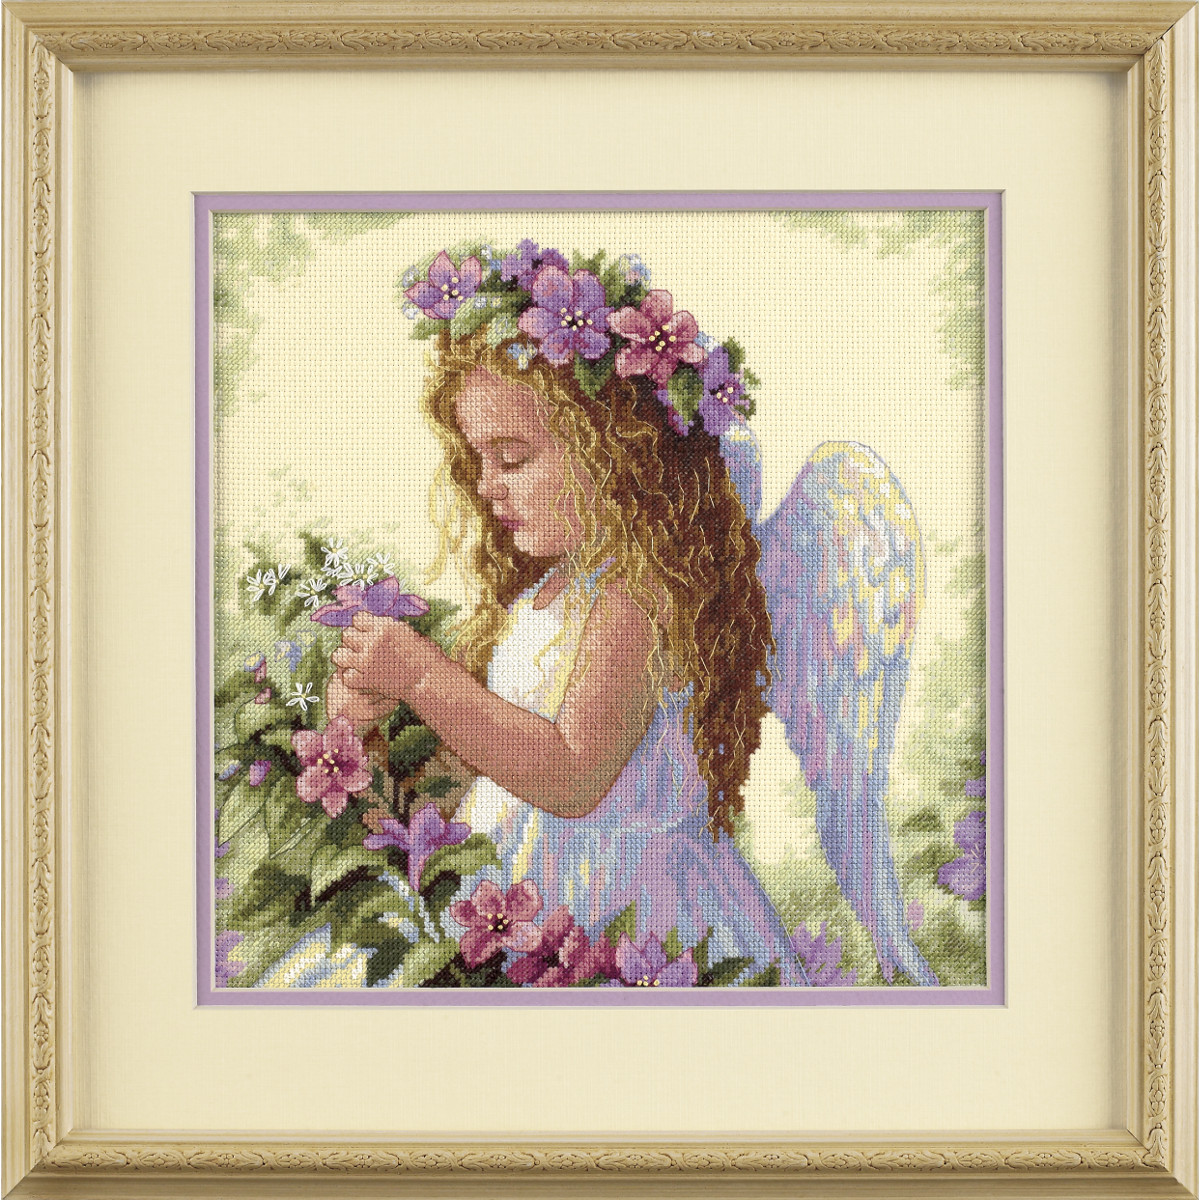 Passion Flower Angel - Dimensions 35229